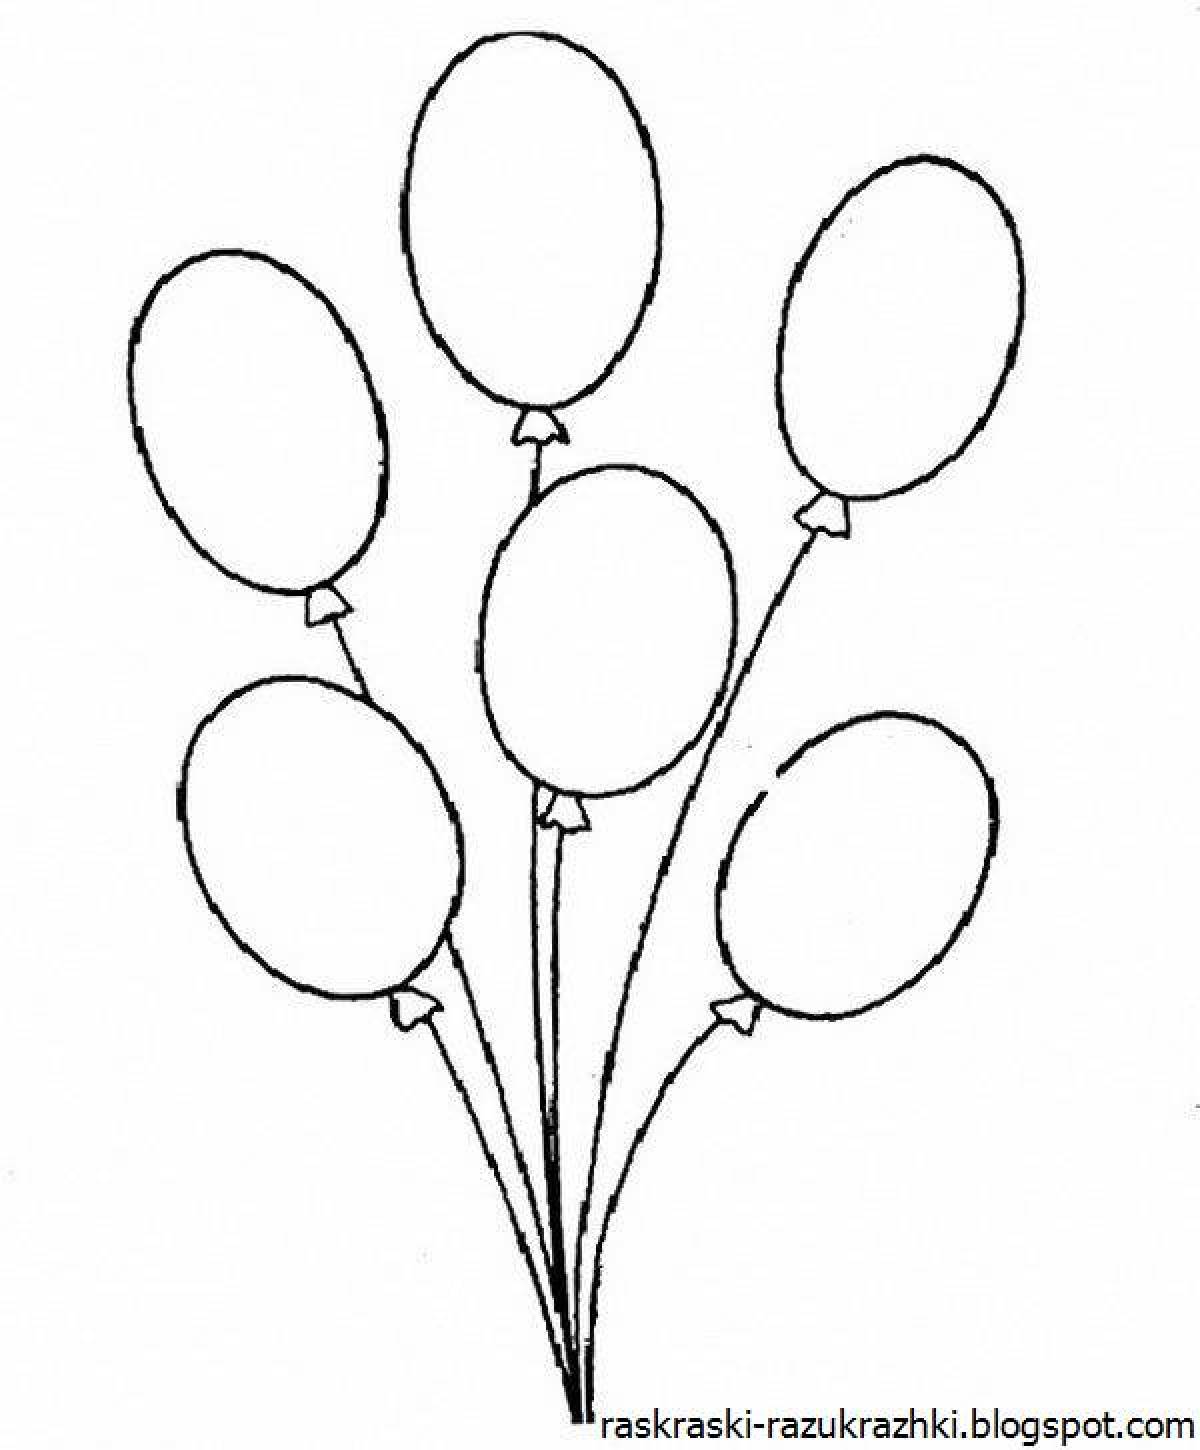 Amazing coloring pages with balloons for kids